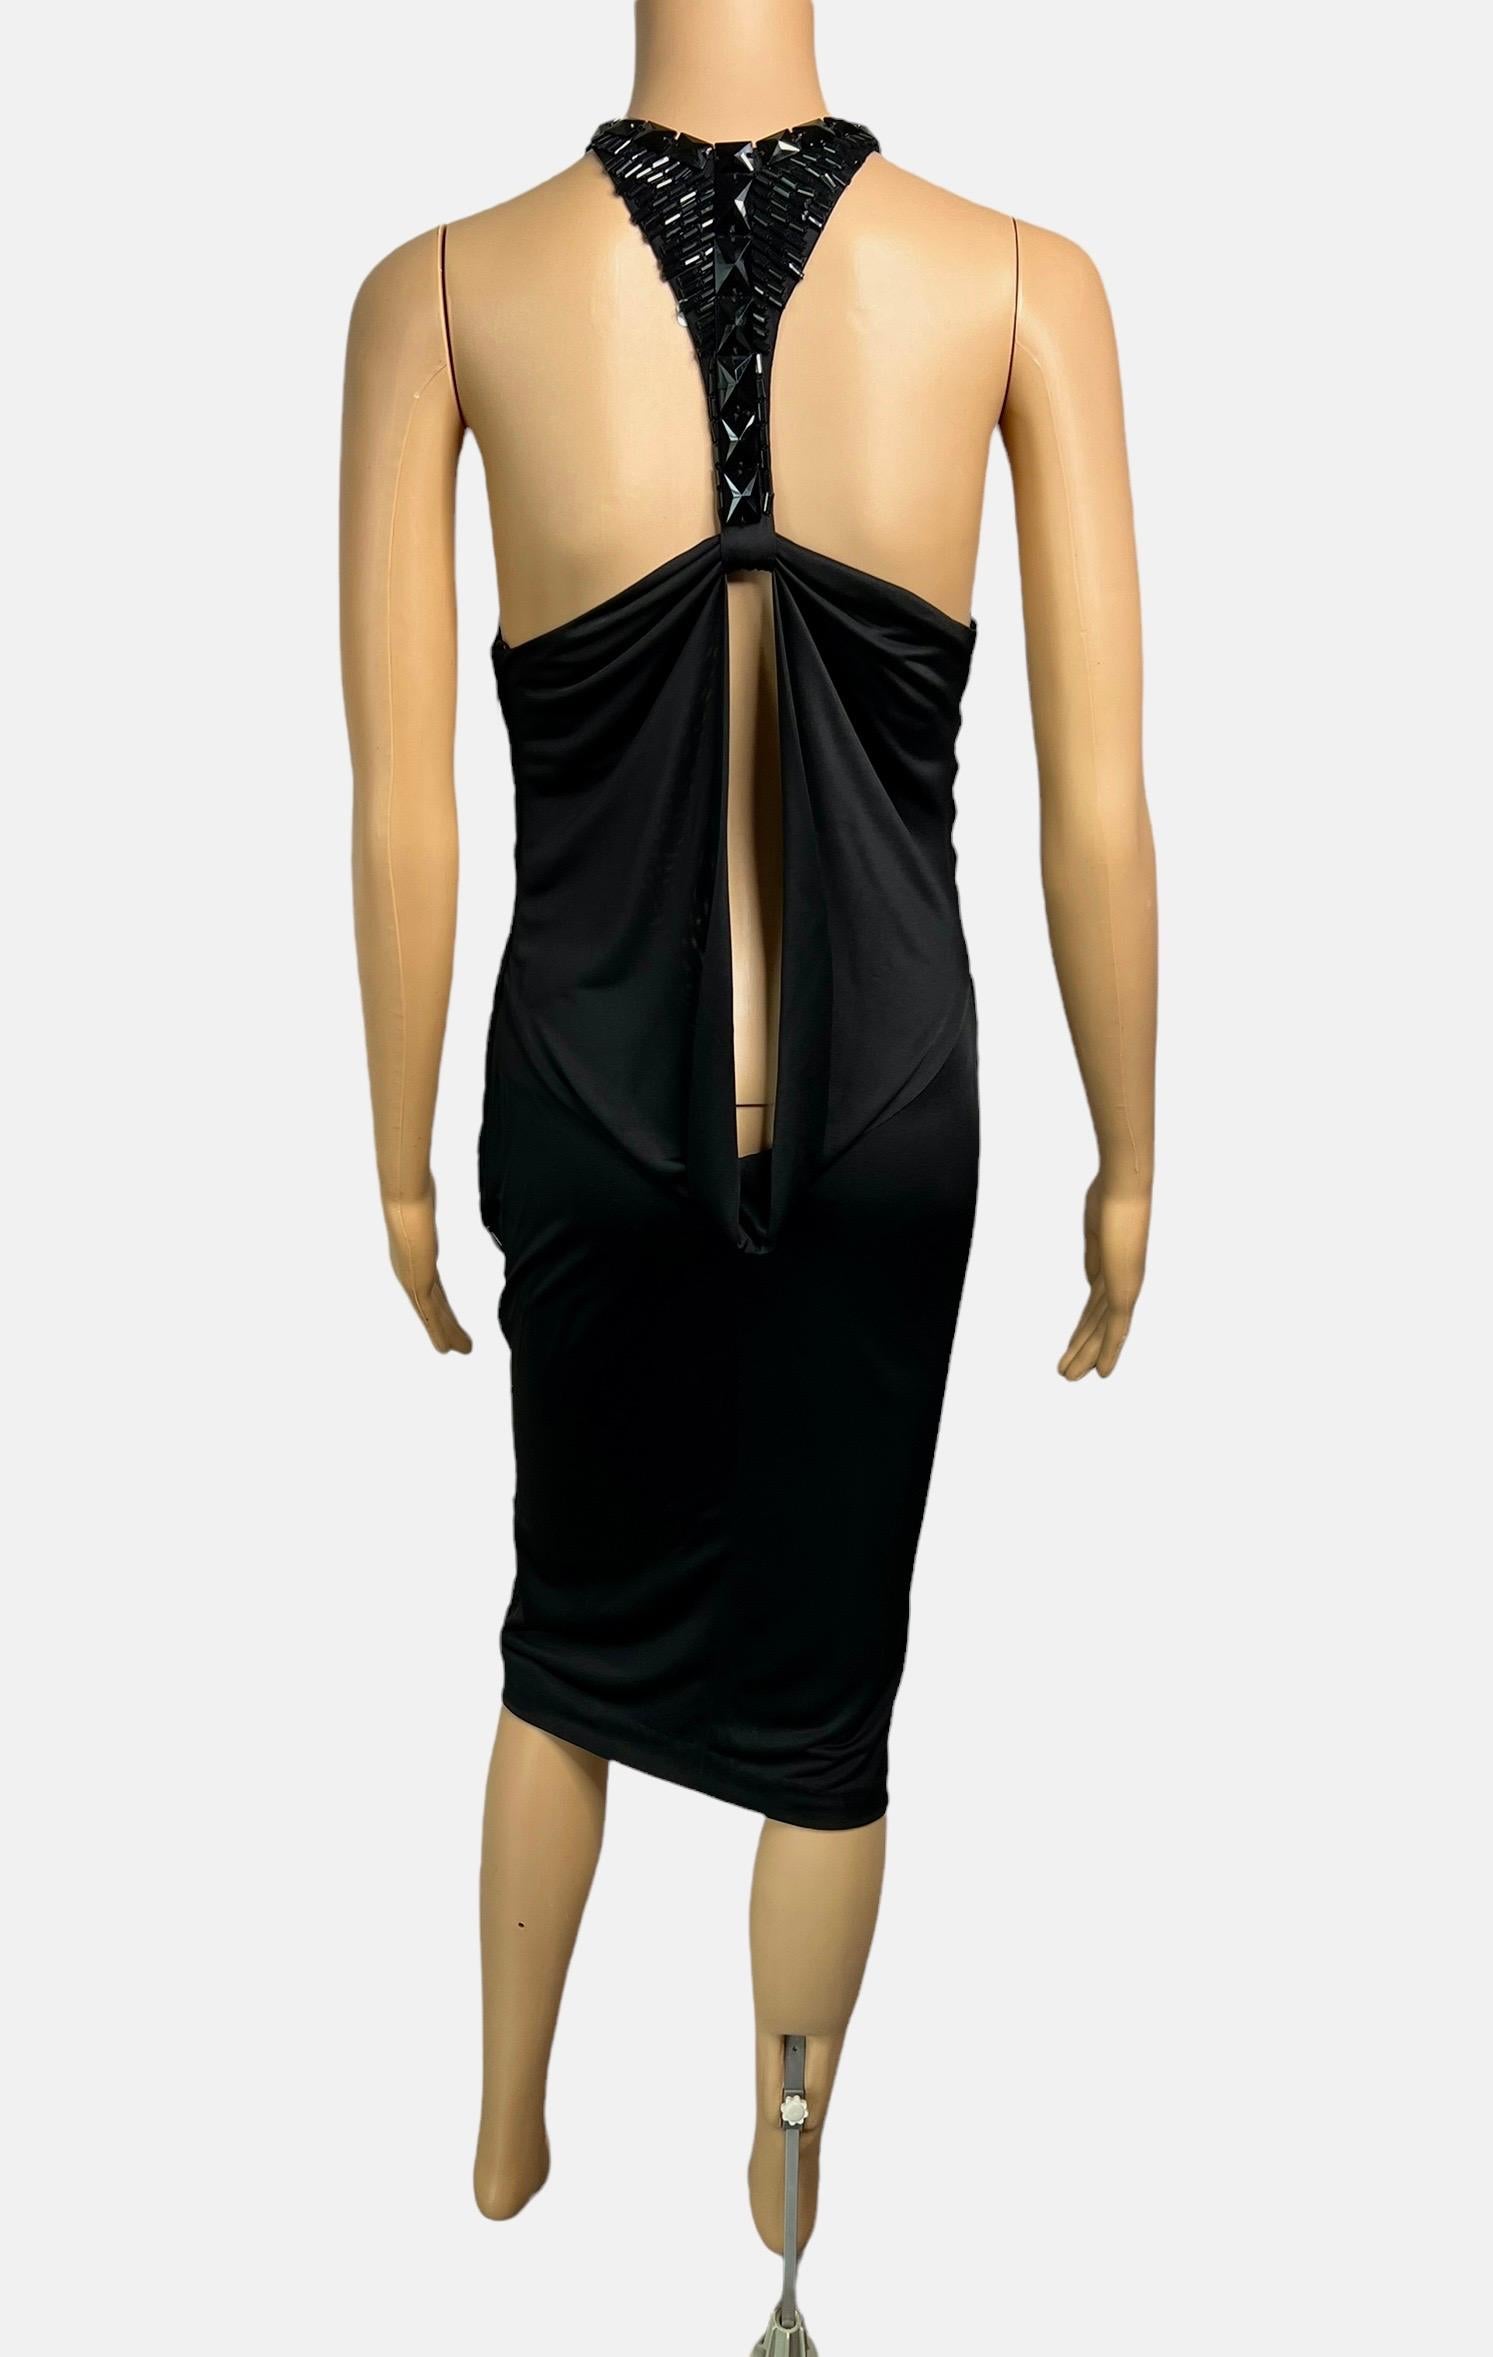 Tom Ford for Gucci F/W 2004 Embellished Plunging Cutout Black Evening Dress  For Sale 7